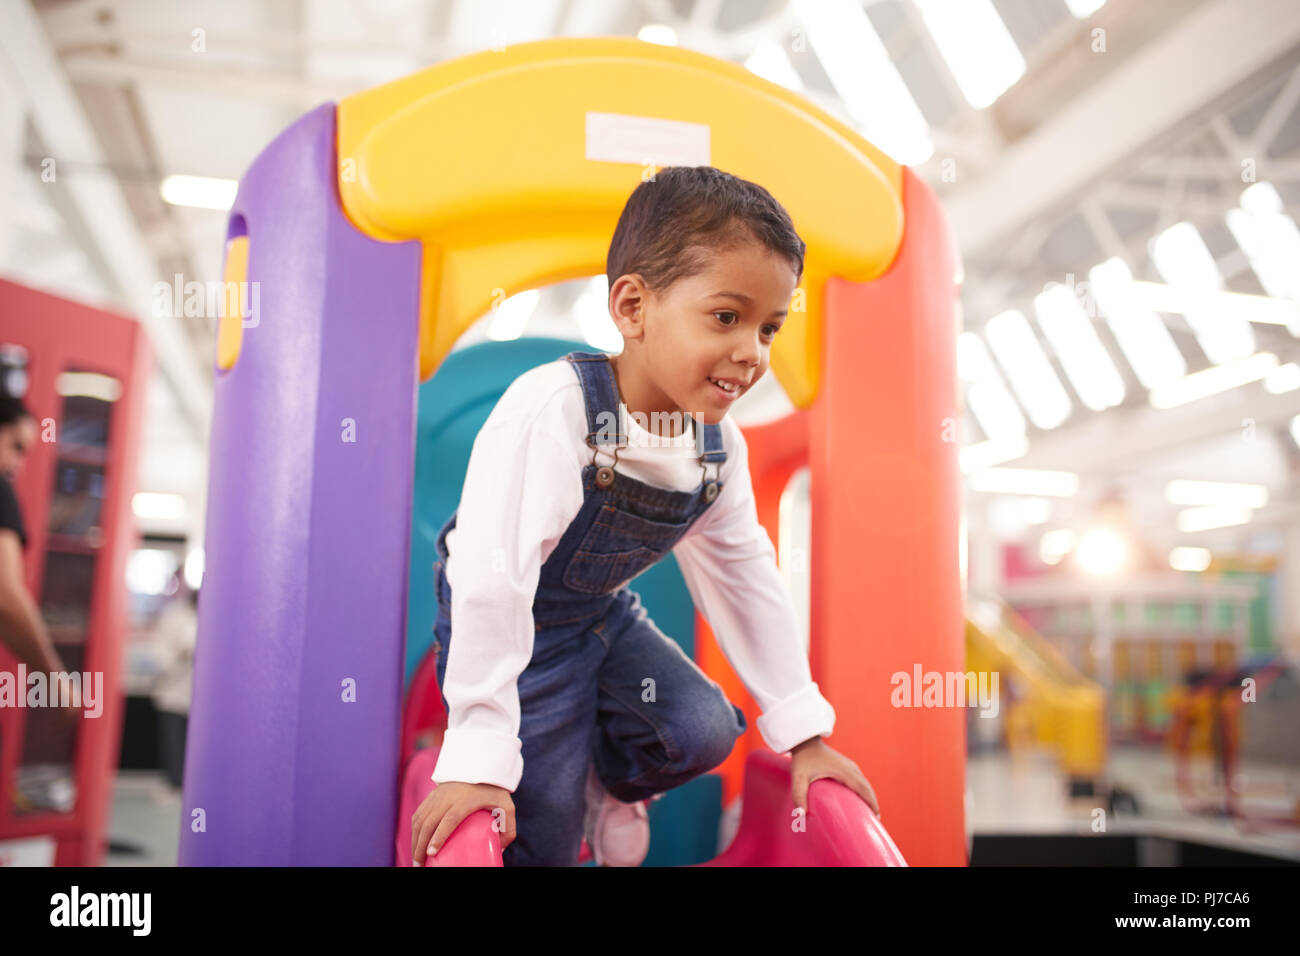 Smiling boy playing on slide Banque D'Images